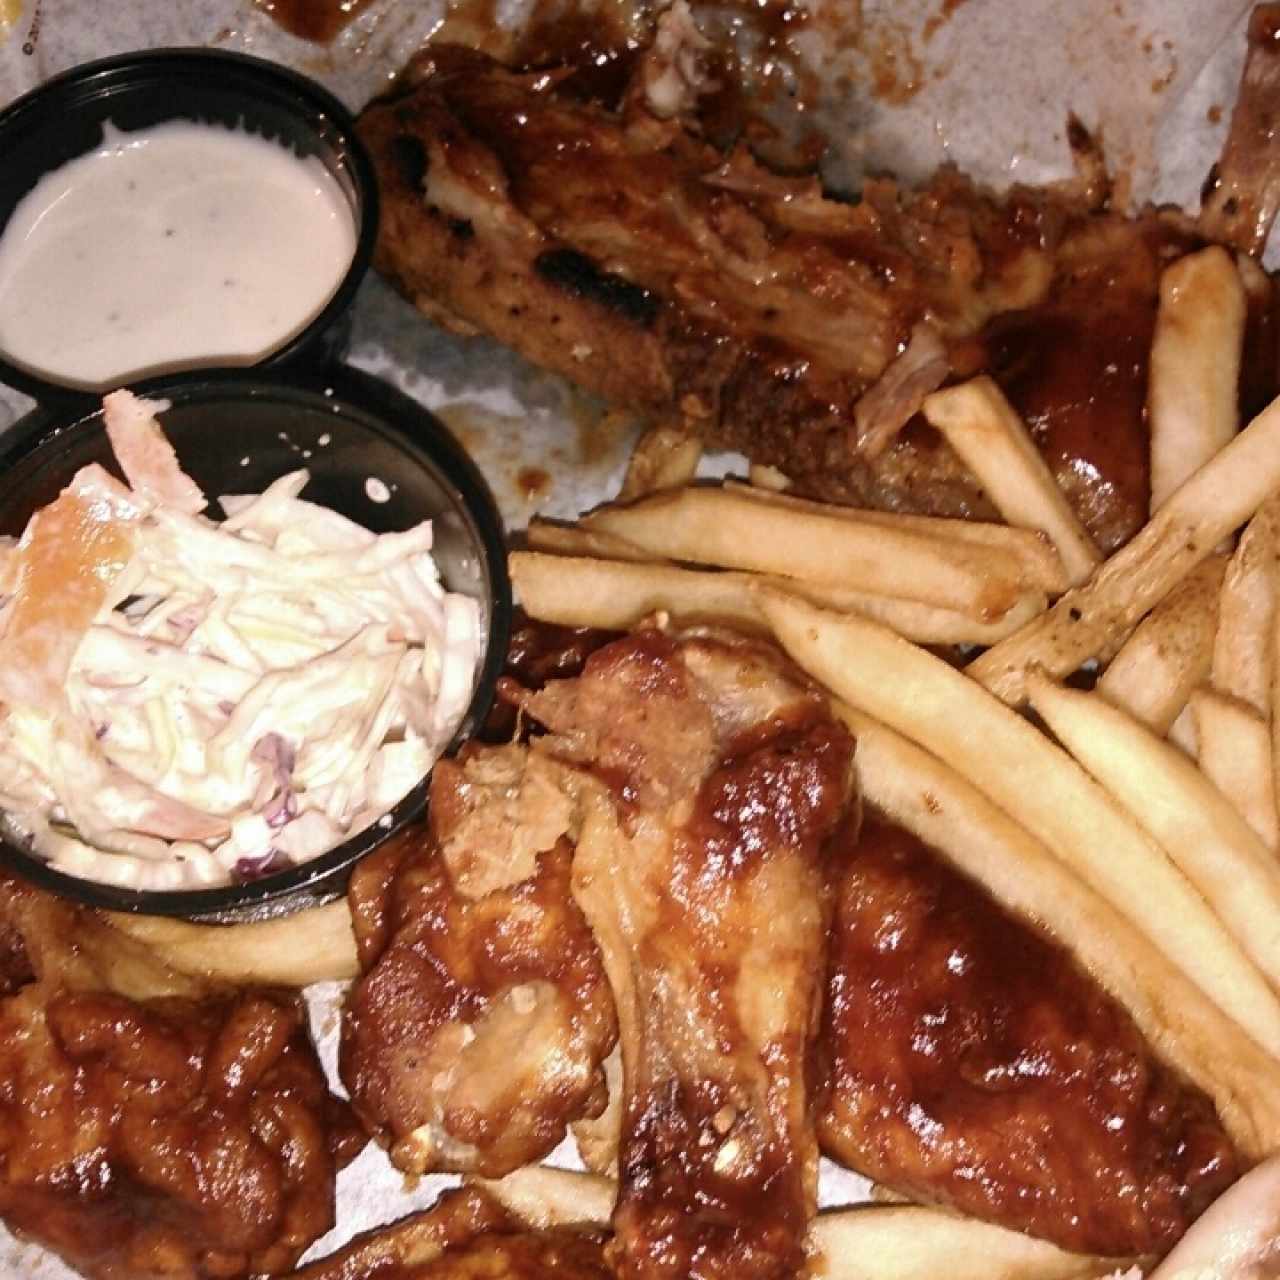 ribs and wings